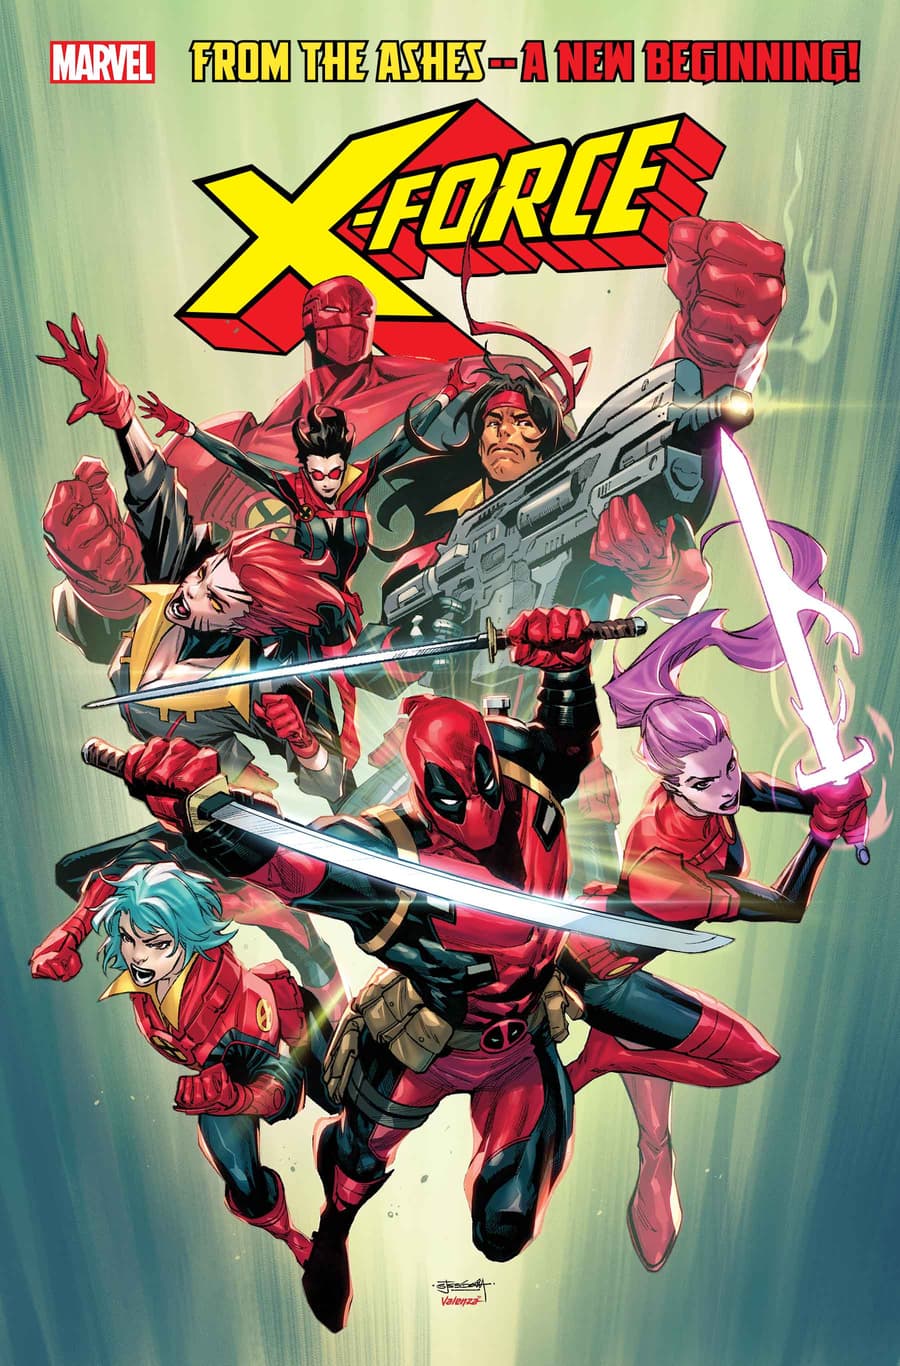 X-Force #1 cover art